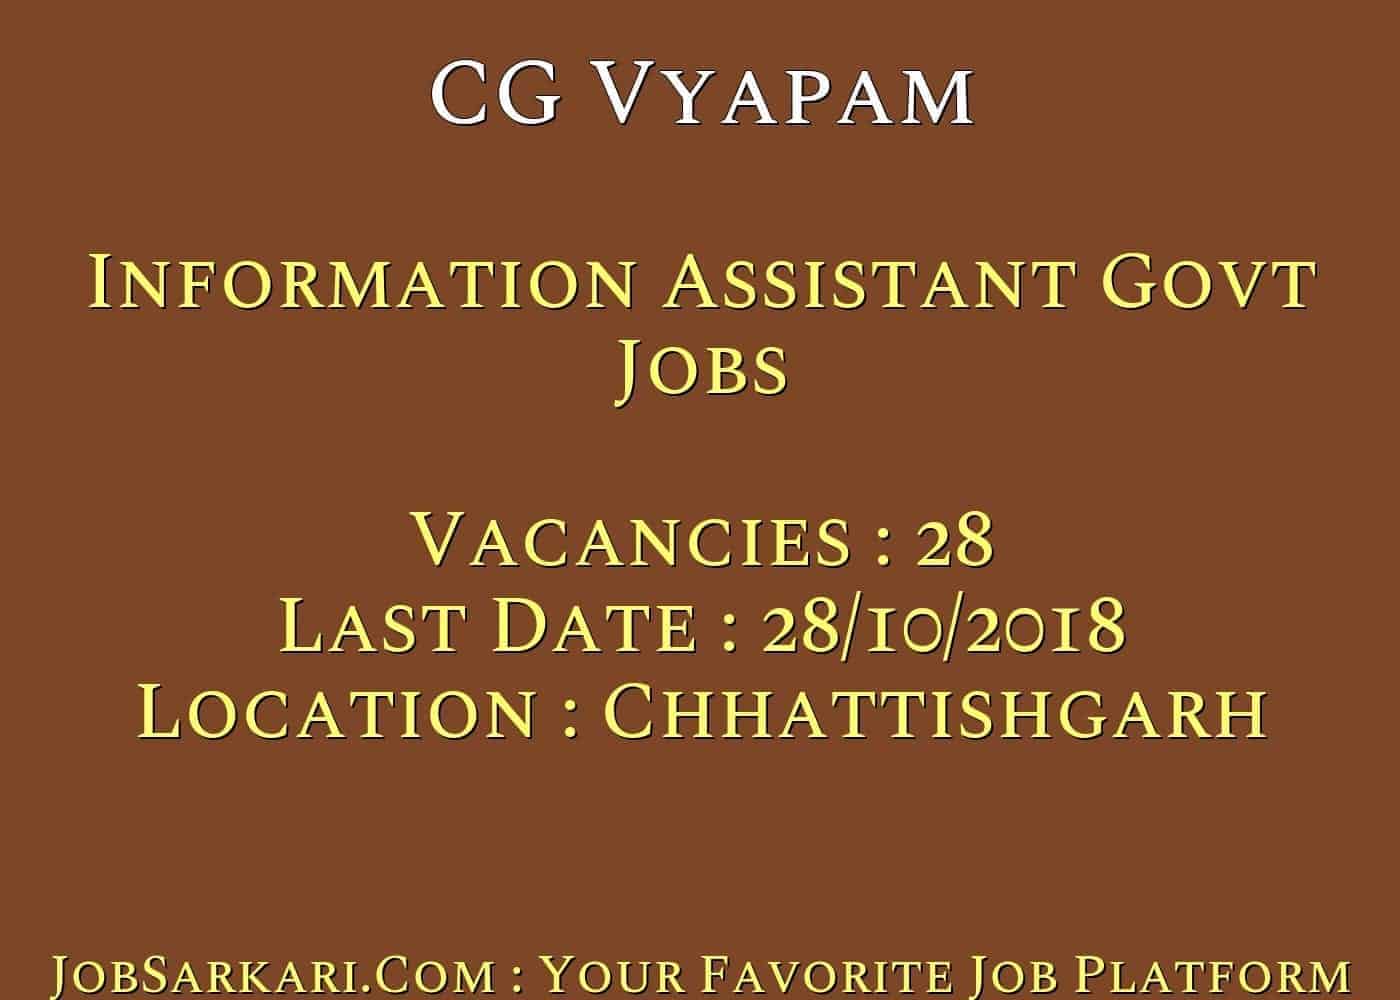 CG Vyapam Recruitment 2018 for Information Assistant Govt Jobs